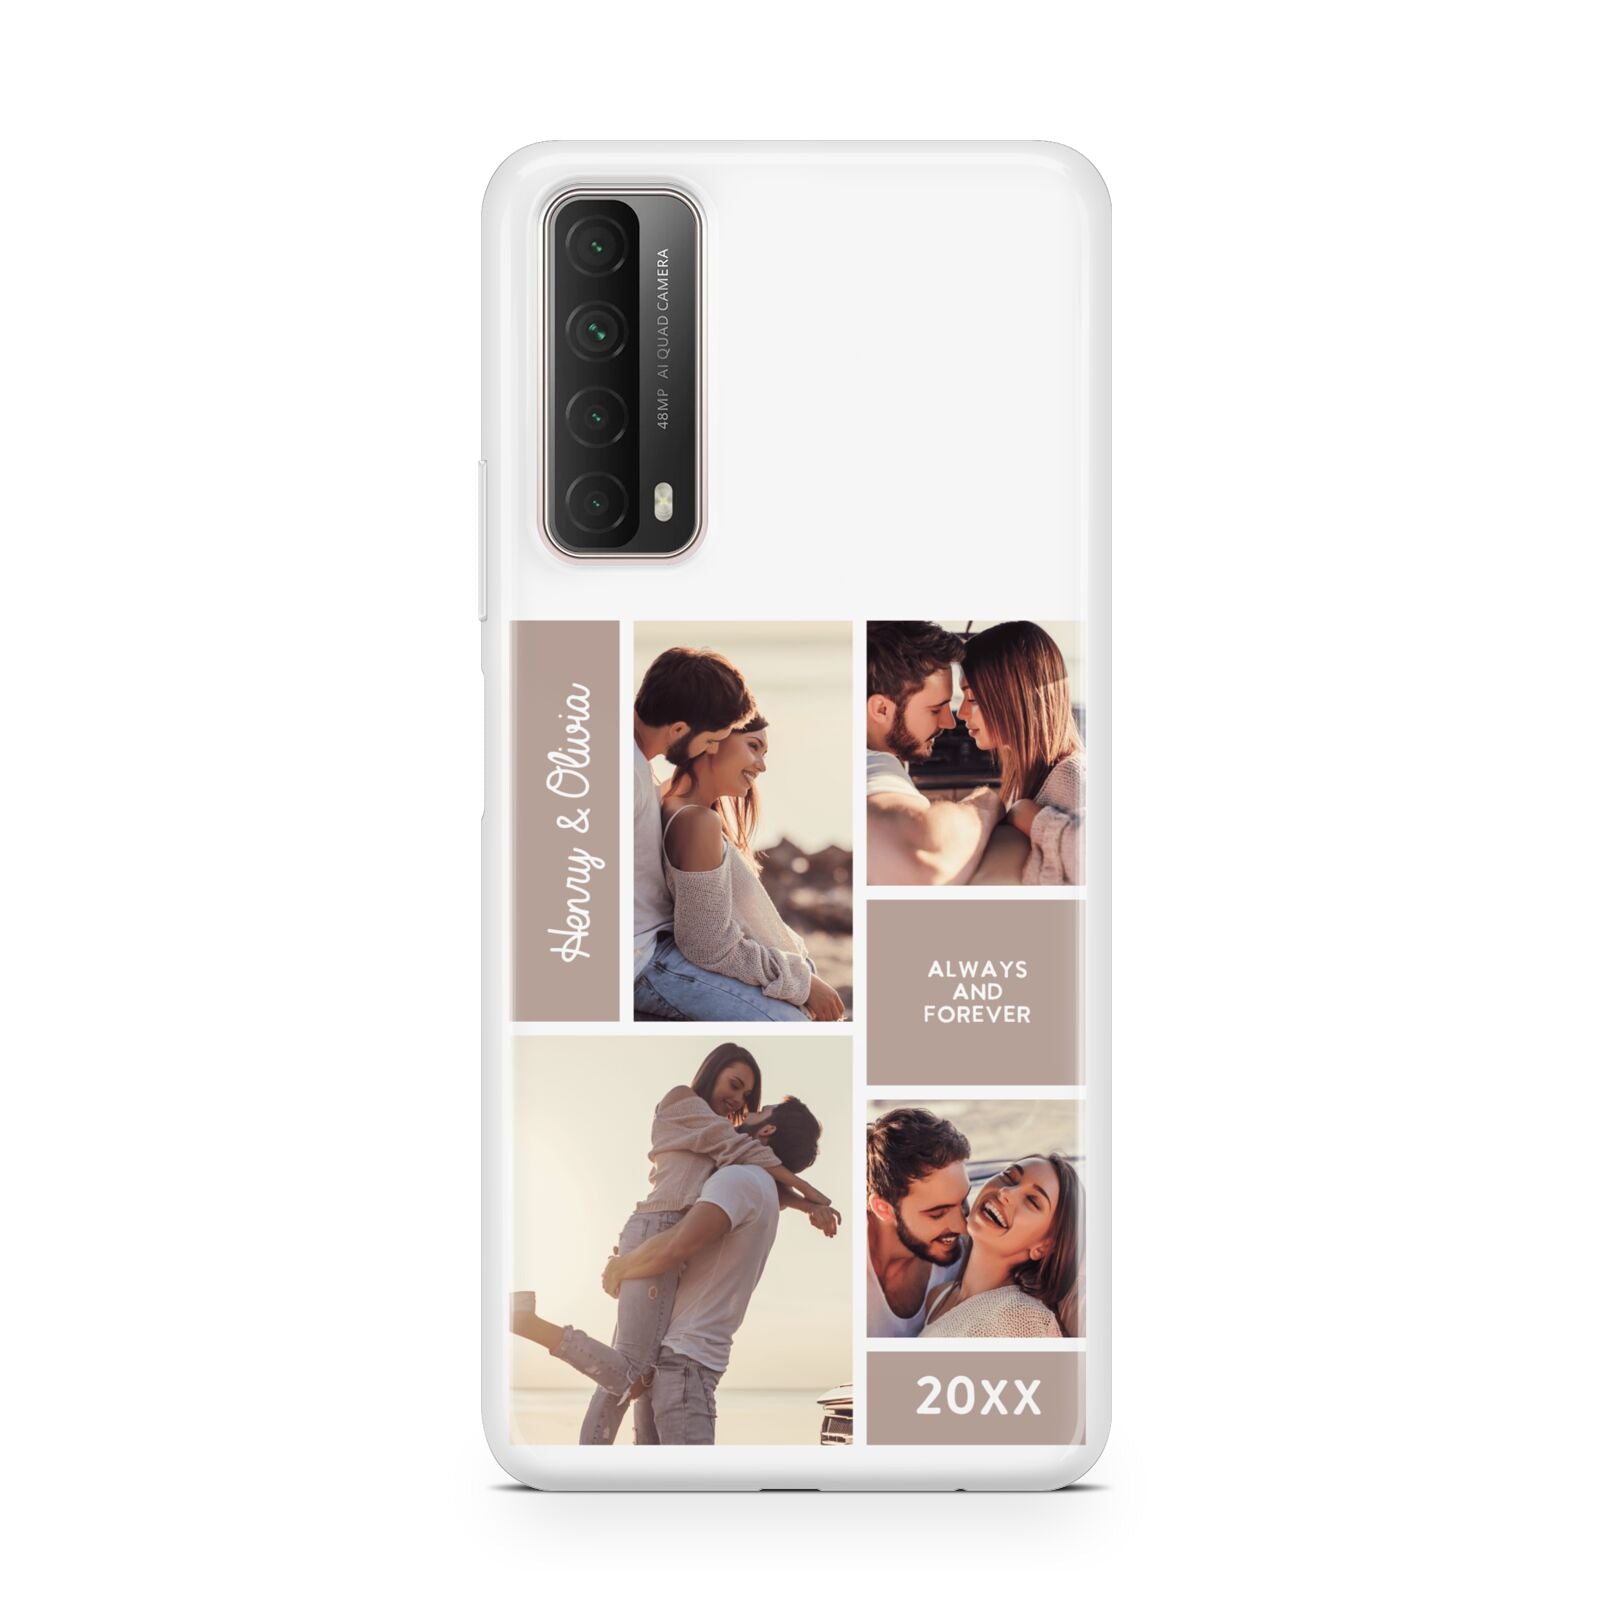 Couples Valentine Photo Collage Personalised Huawei P Smart 2021